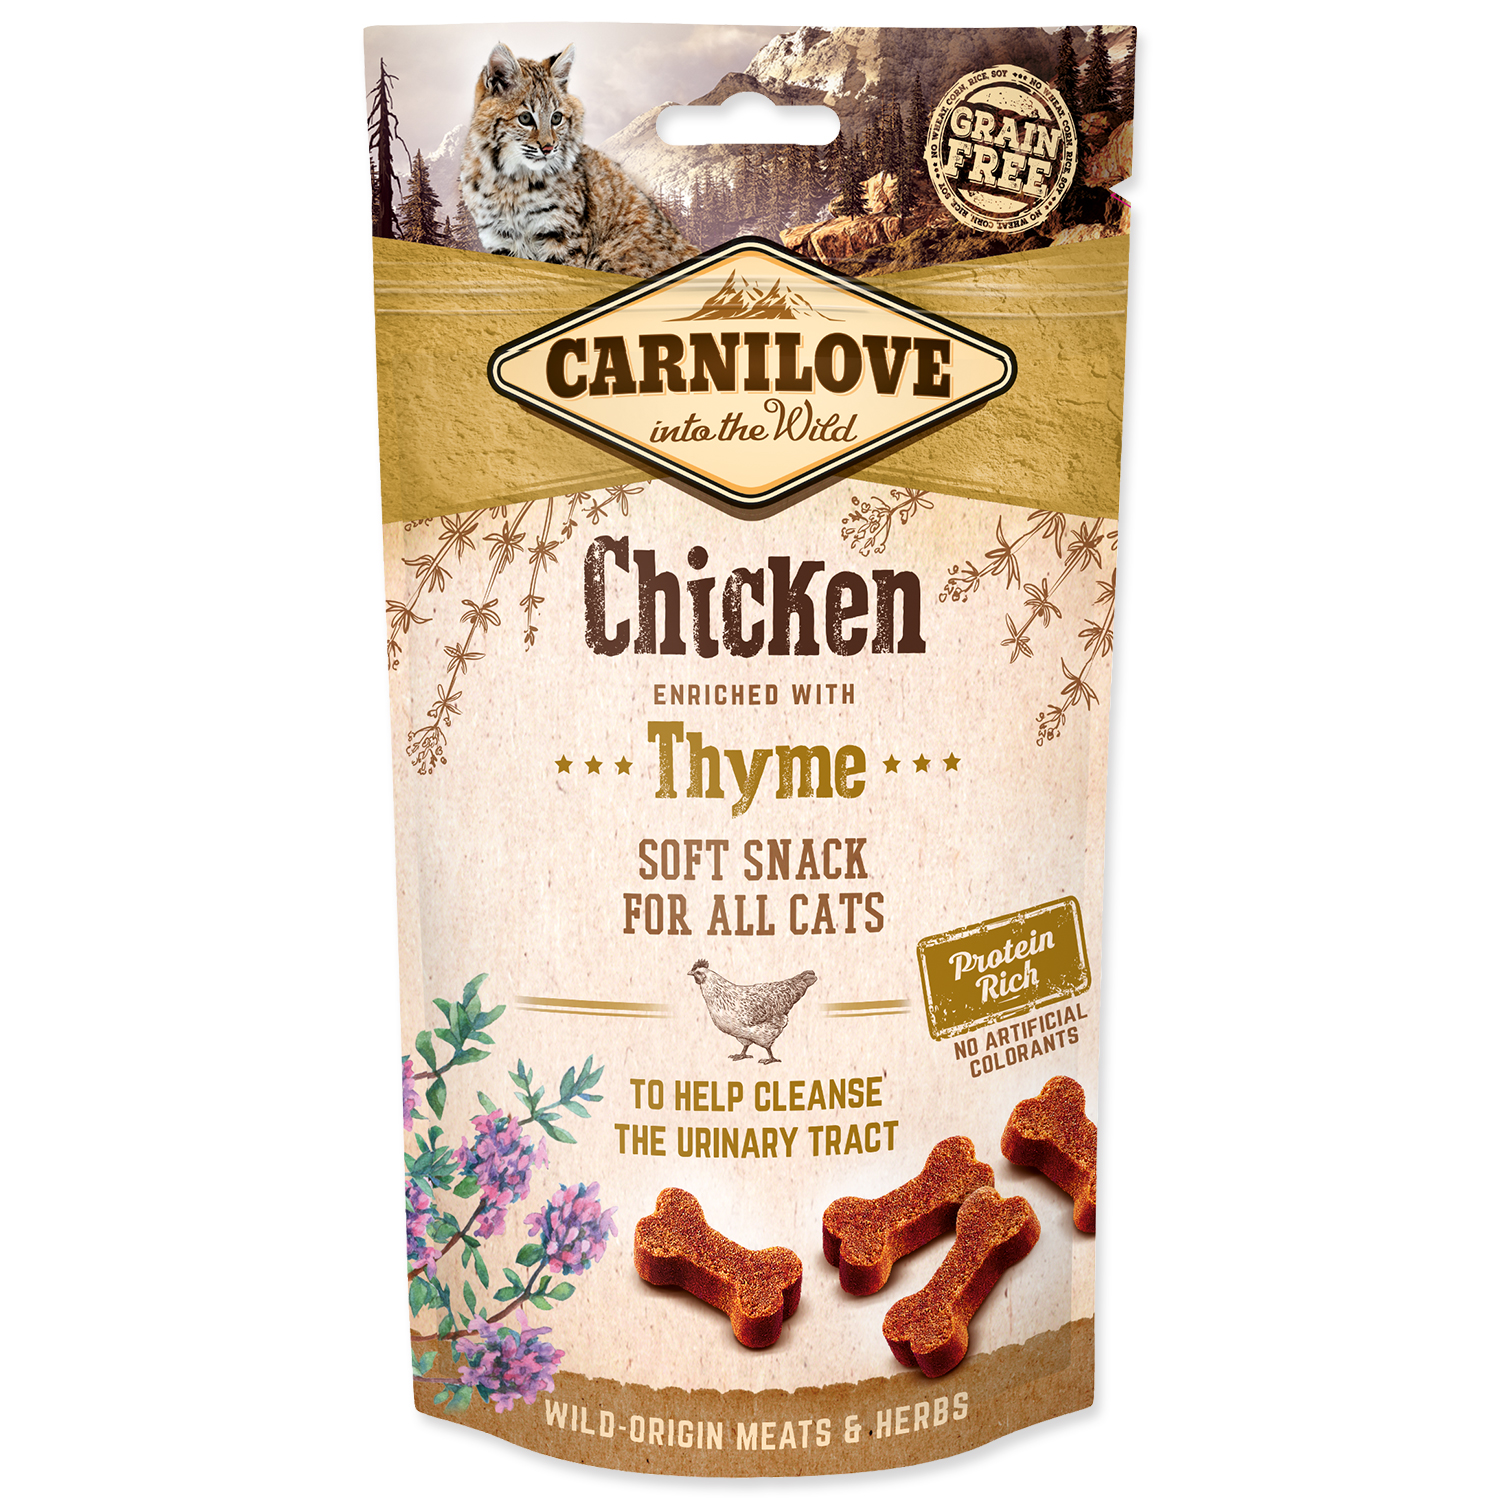 CARNILOVE Cat Semi Moist Snack Chicken enriched with Thyme